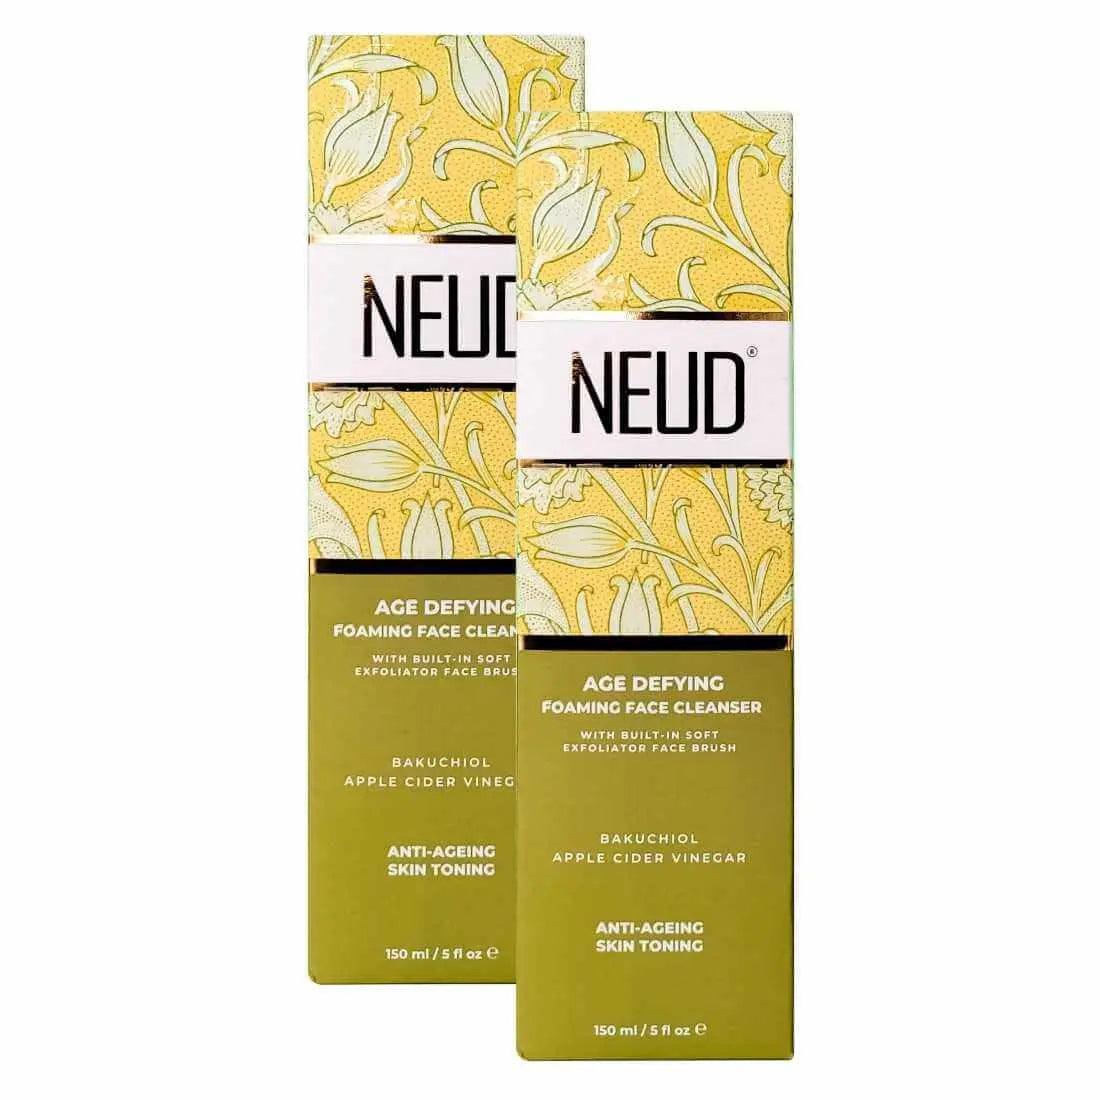 NEUD Age Defying Foaming Face Cleanser With Apple Cider Vinegar and Bakuchiol - 150 ml 9559682309242